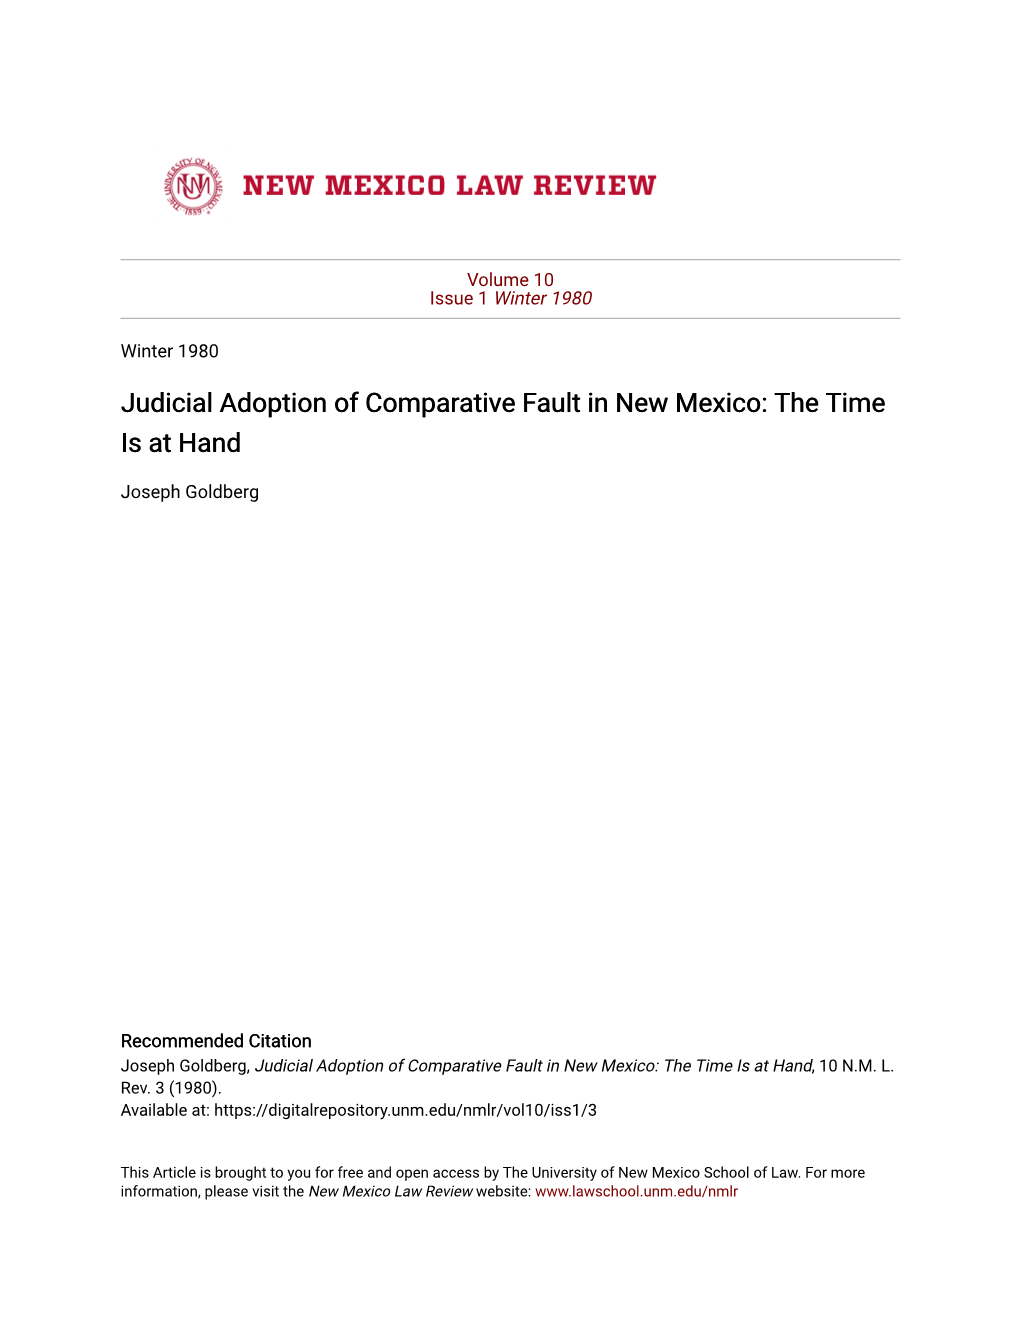 Judicial Adoption of Comparative Fault in New Mexico: the Time Is at Hand